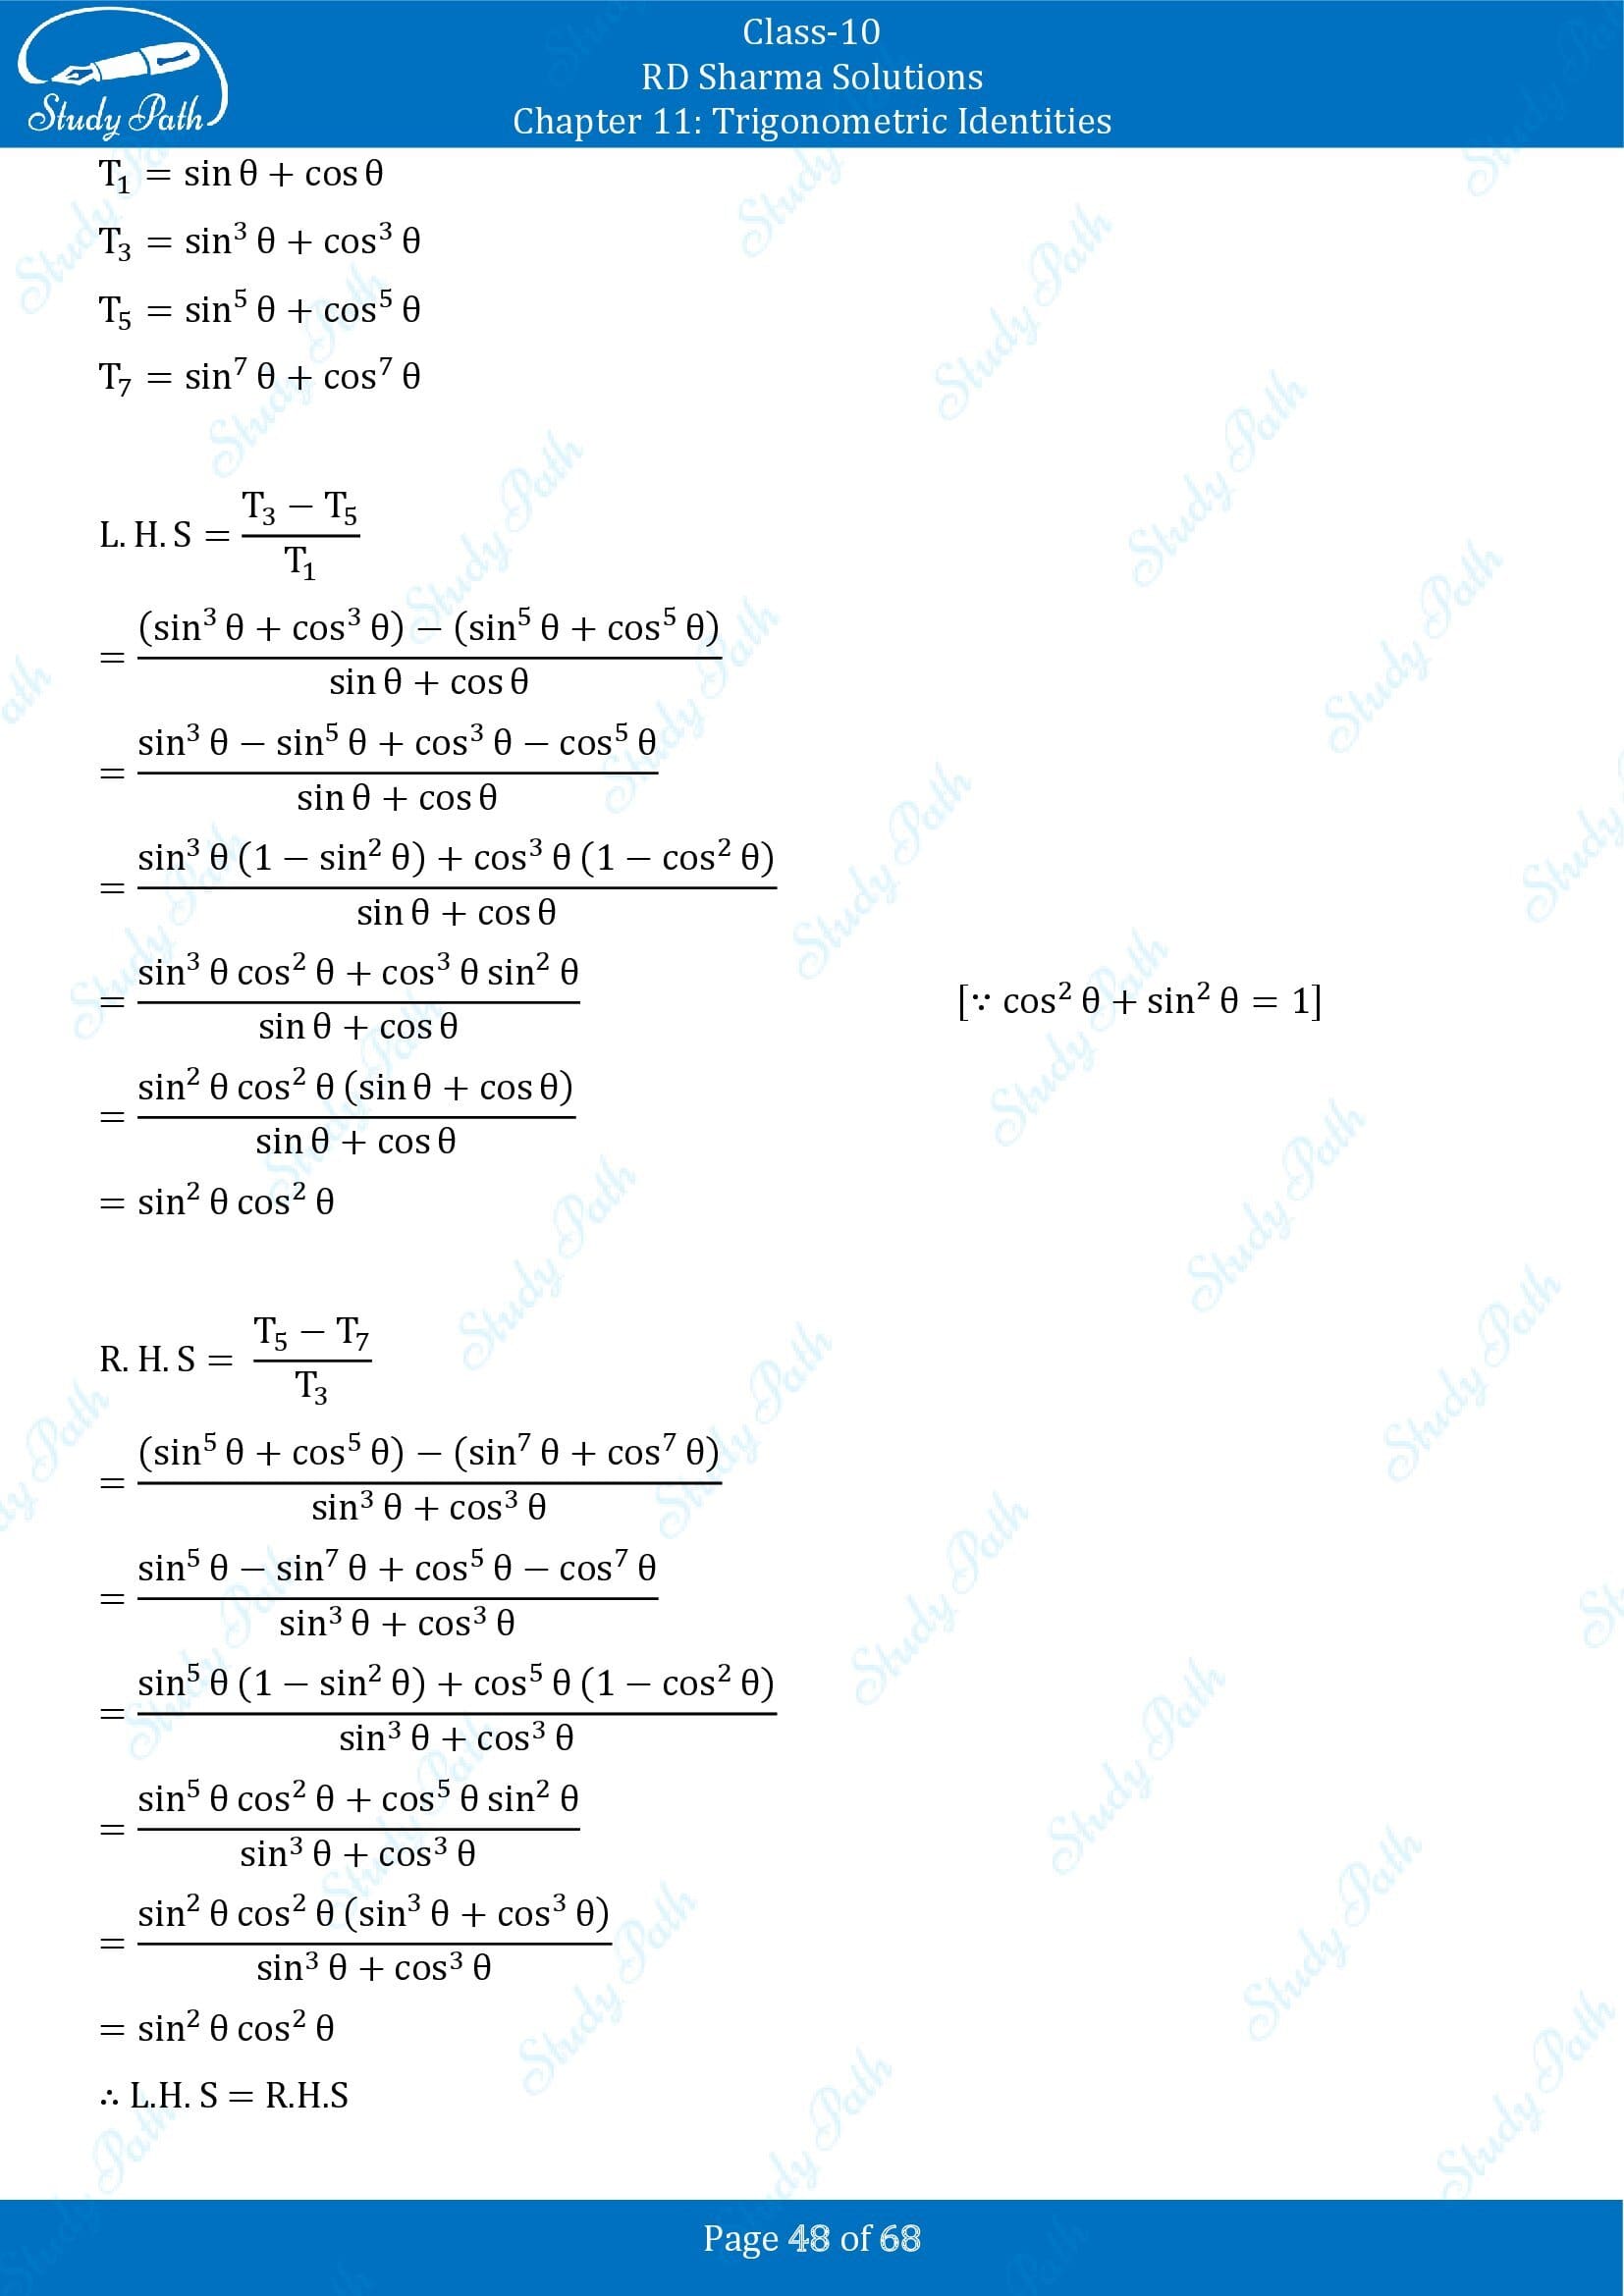 RD Sharma Solutions Class 10 Chapter 11 Trigonometric Identities Exercise 11.1 00048